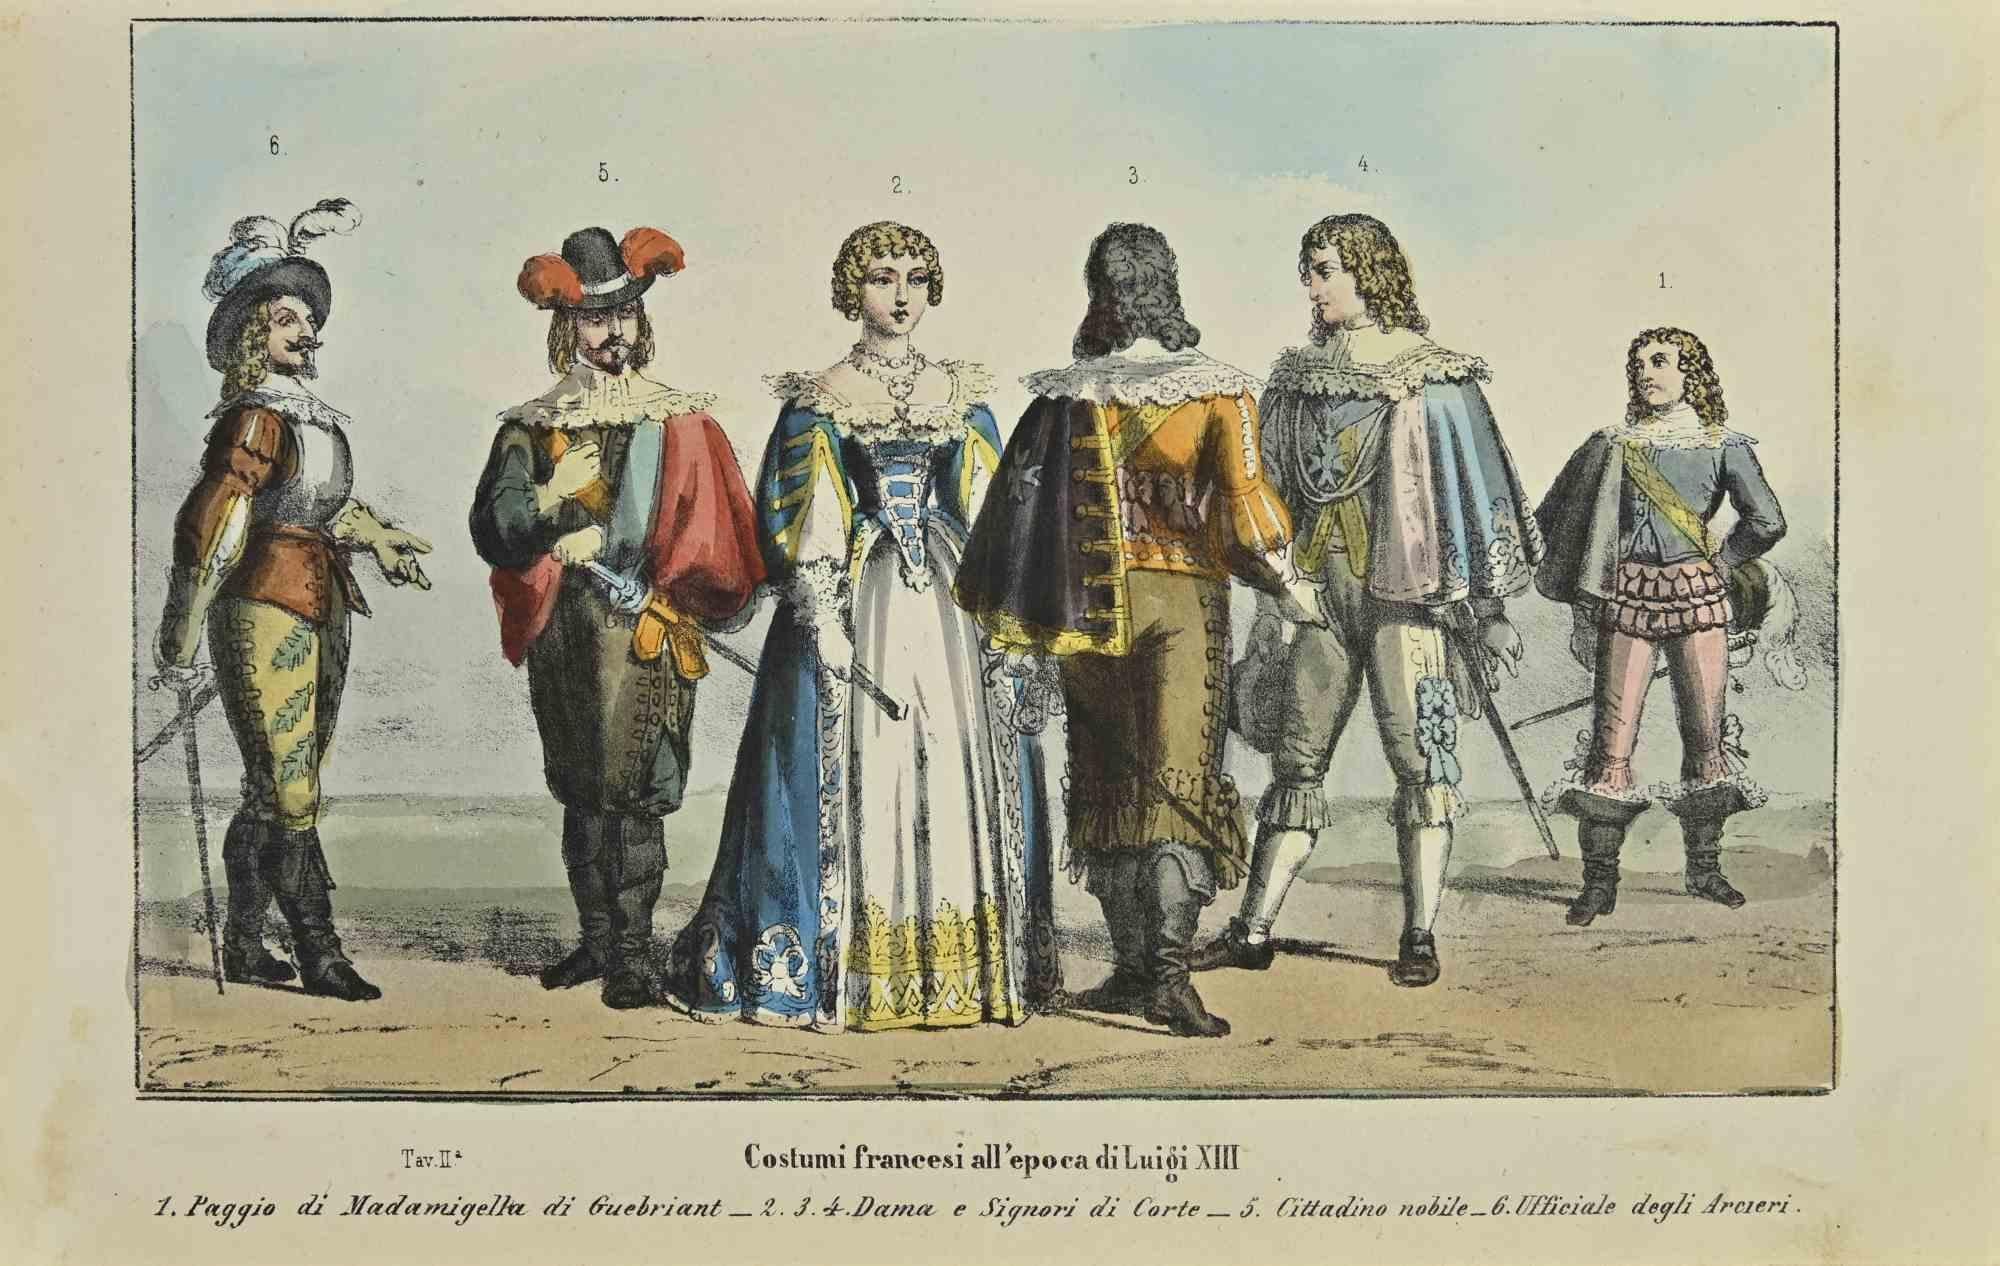 French Costumes at the time of Louis XII is a lithograph made by Auguste Wahlen in 1844.

Hand colored.

Good condition.

At the center of the artwork is the original title "Costumi Francesi all'epoca di Luigi XIII".

The work is part of Suite